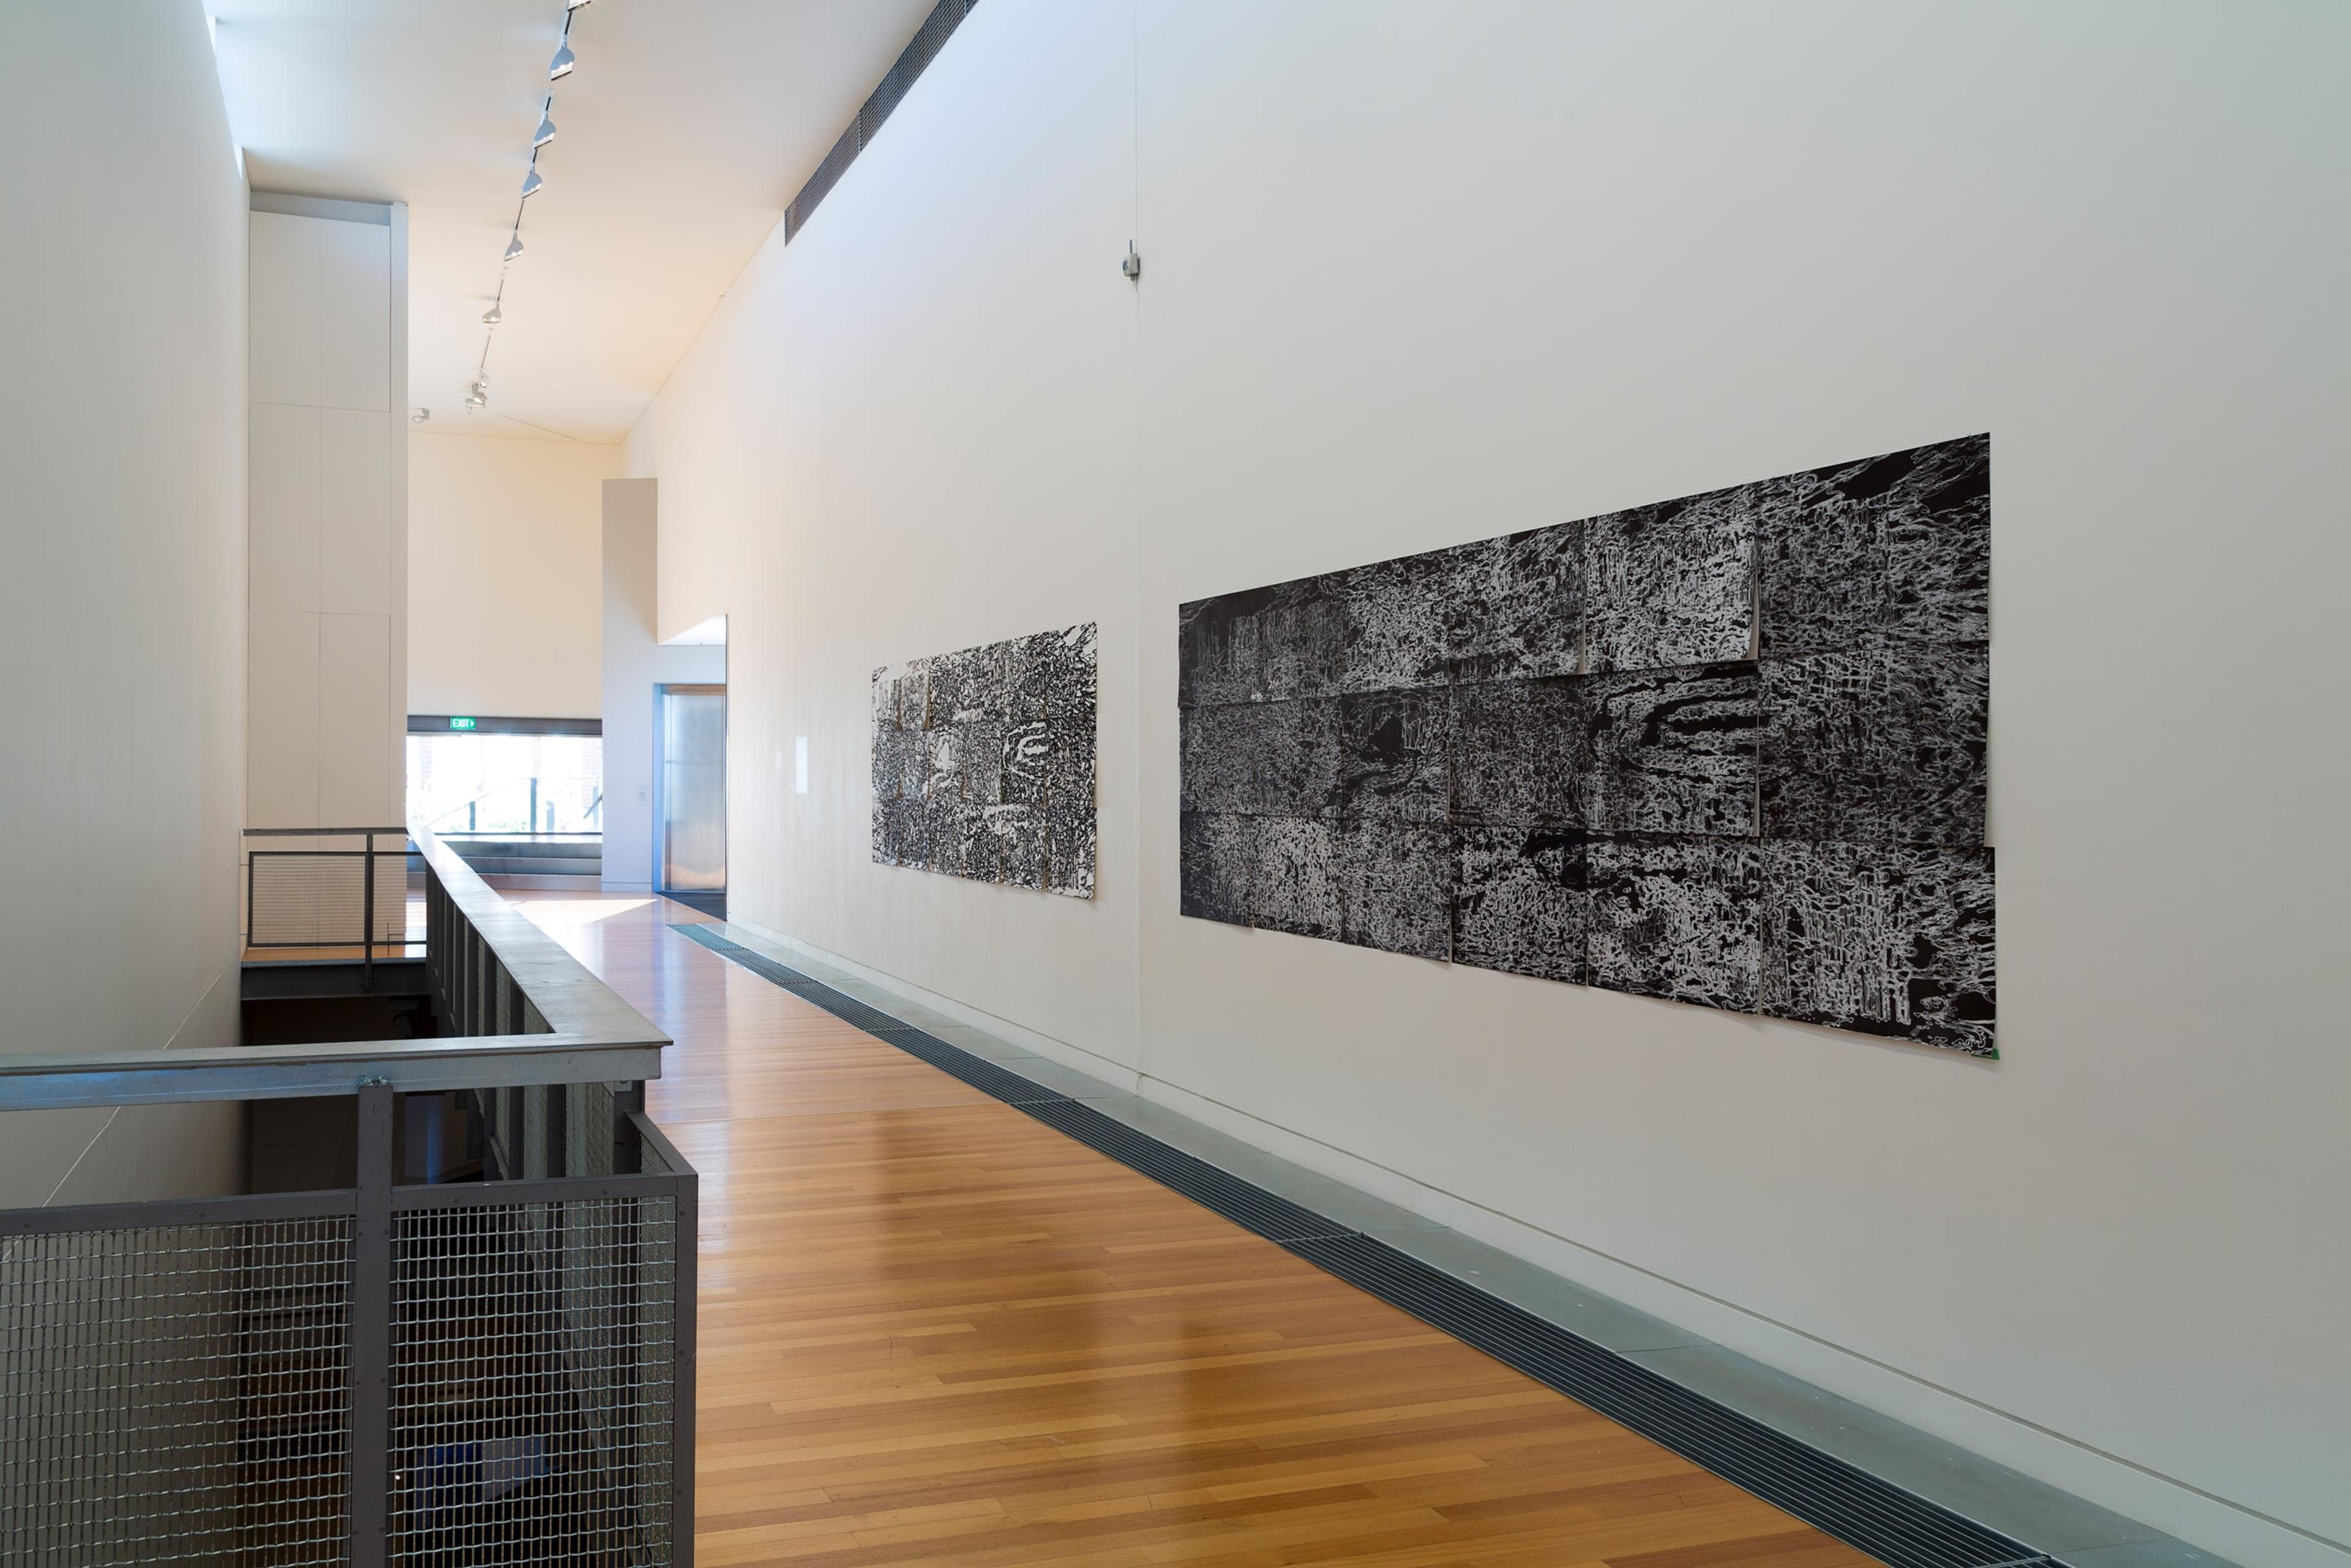 Sarah Treadwell, Oceanic Foundations: Rising Water 1 & 2, 2014, mixed media on unstretched canvas, in the exhibition Drawing Is/Not Building at the Adam Art Gallery Te Pātaka Toi, Victoria University of Wellington (photo: Shaun Waugh)